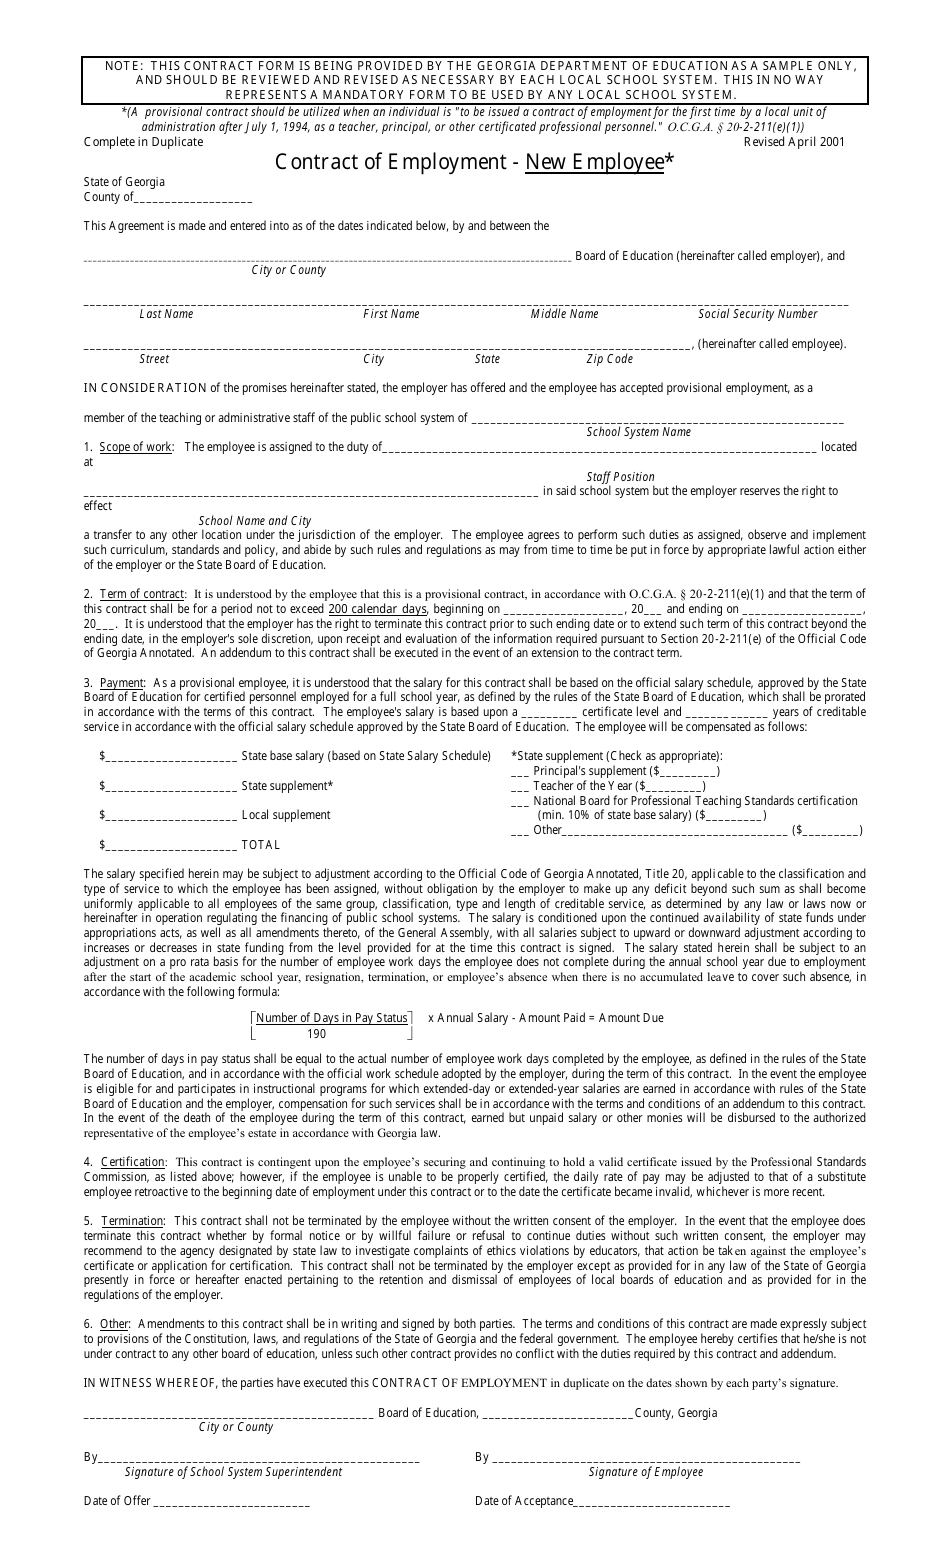 Georgia (United States) Contract of Employment New Employee Fill